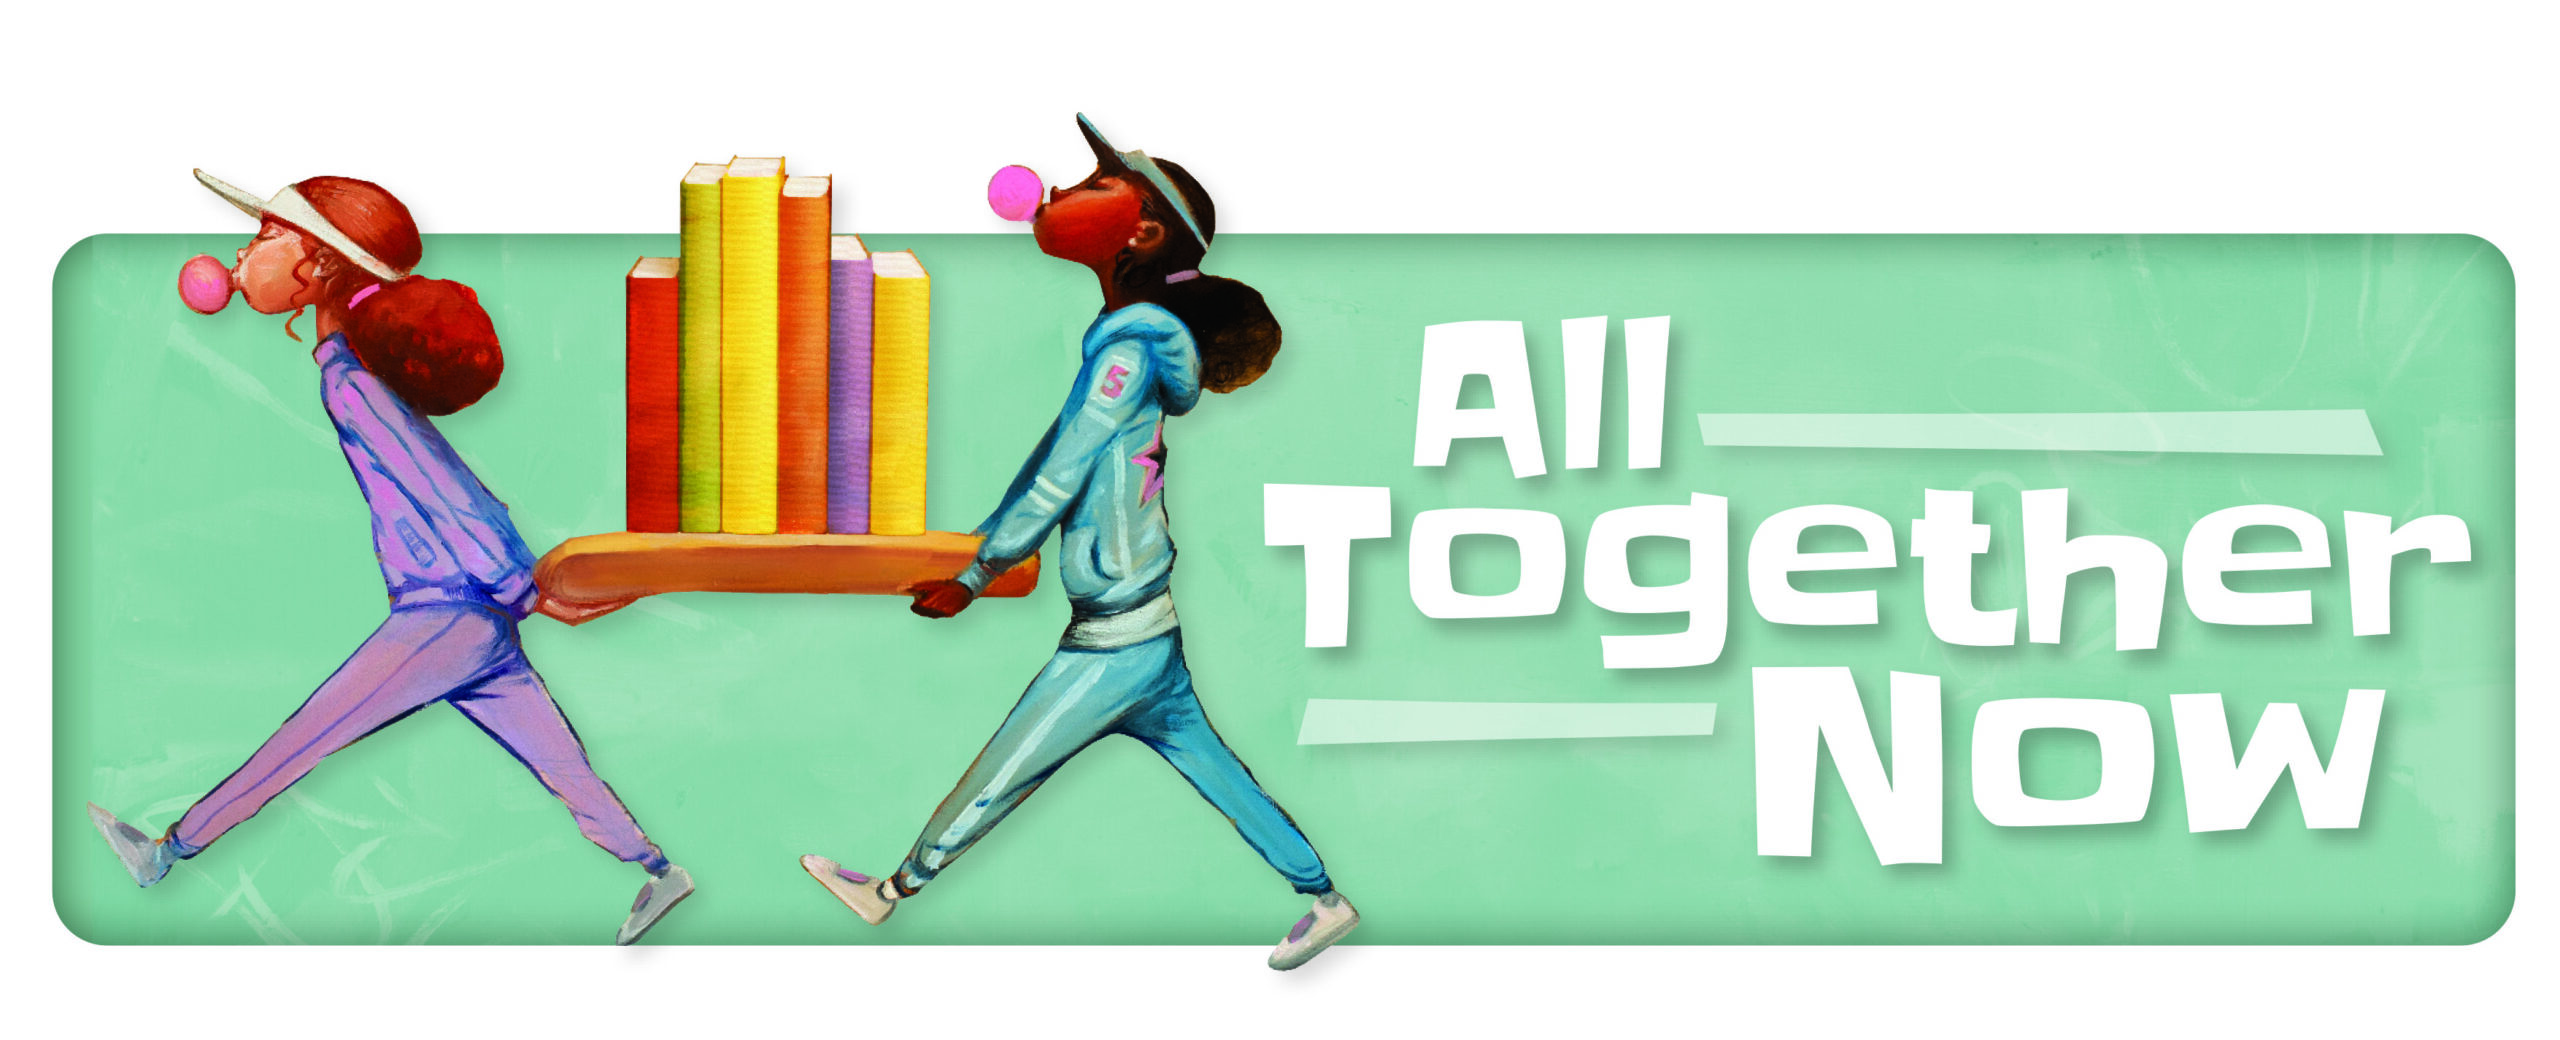 All Together Now poster featuring children carrying books